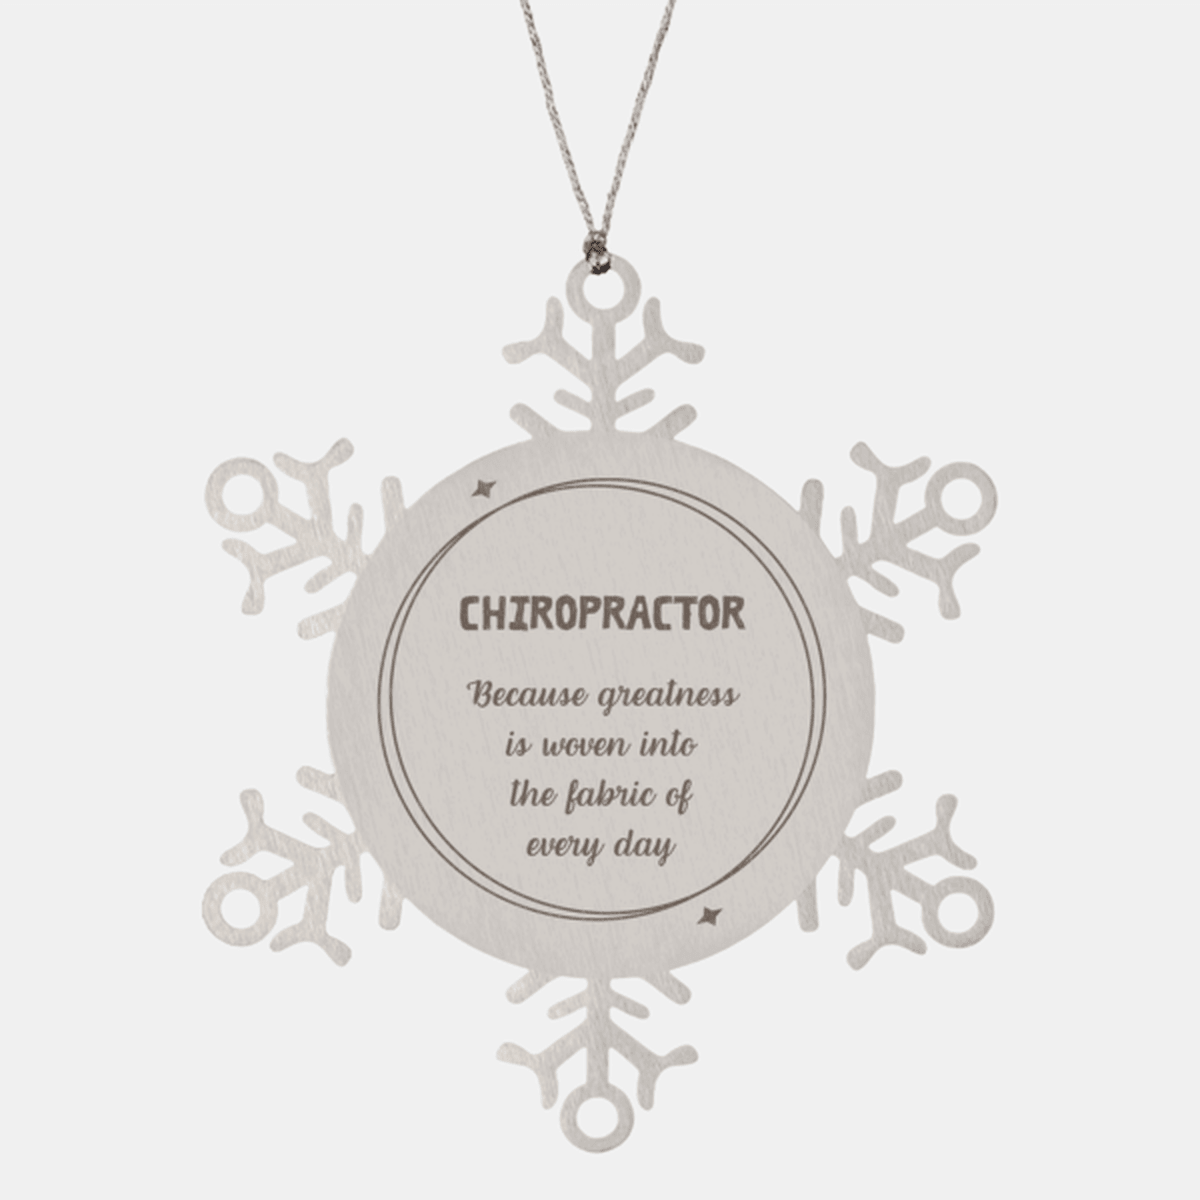 Sarcastic Chiropractor Snowflake Ornament Gifts, Christmas Holiday Gifts for Chiropractor Ornament, Chiropractor: Because greatness is woven into the fabric of every day, Coworkers, Friends - Mallard Moon Gift Shop